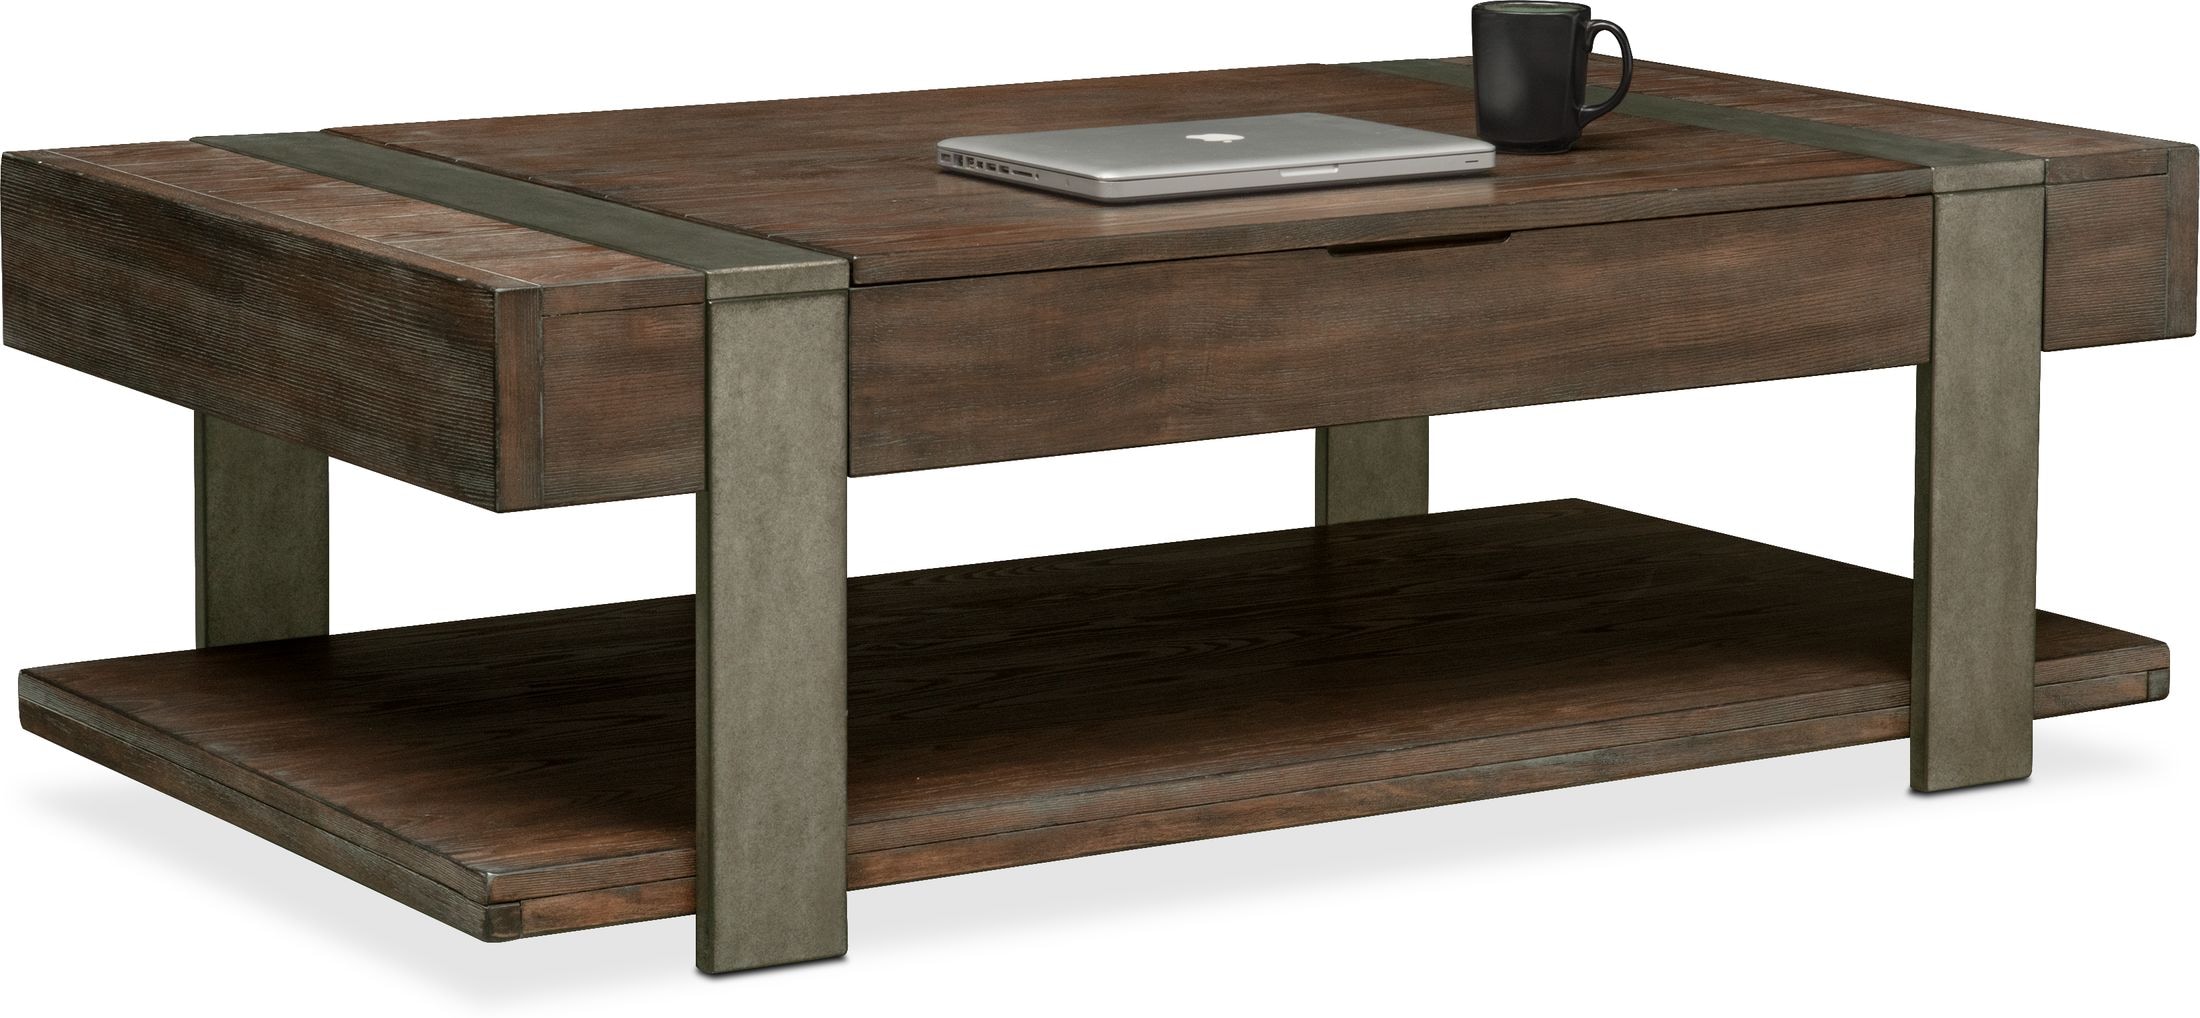 Union City Lift Top Coffee Table Value City Furniture